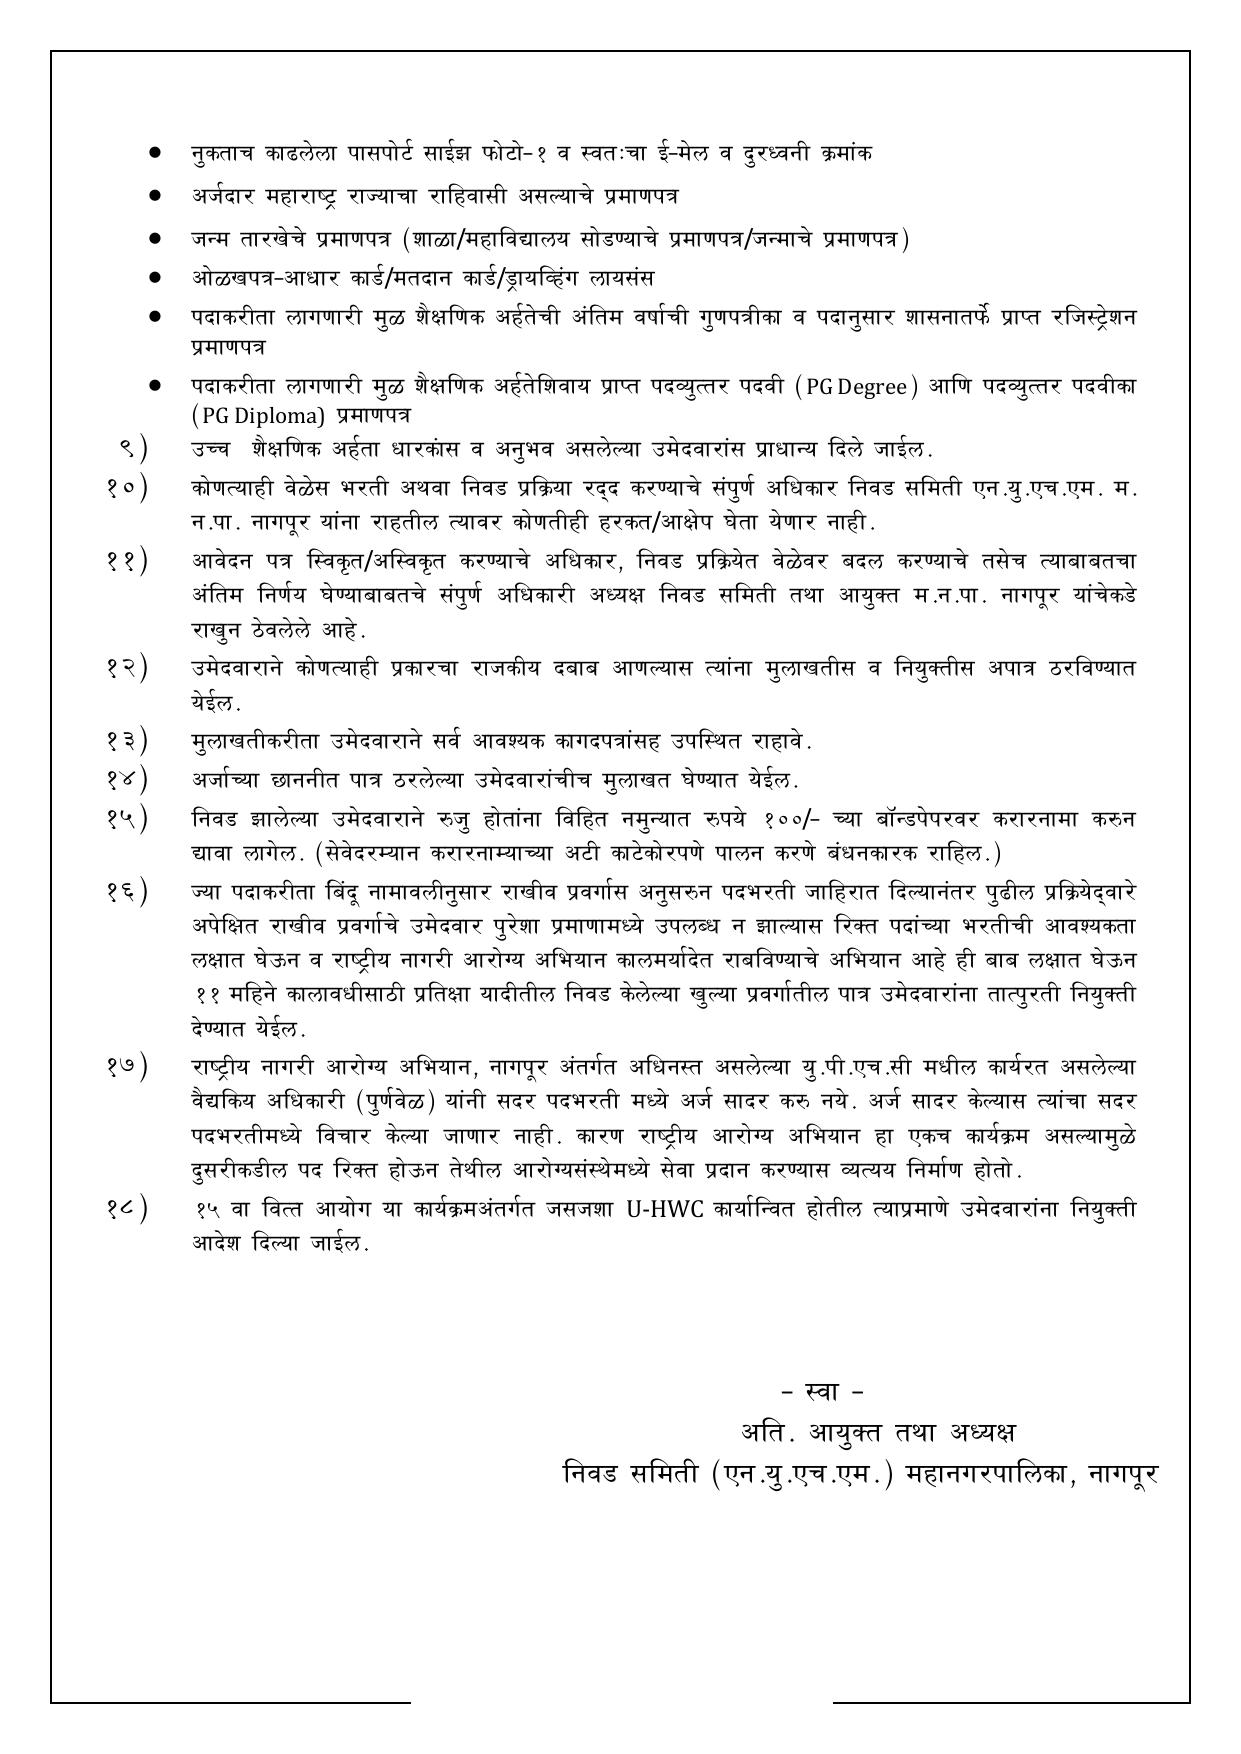 Nagpur Municipal Corporation (NMC) Full Time Medical Officer Recruitment 2023 - Page 2